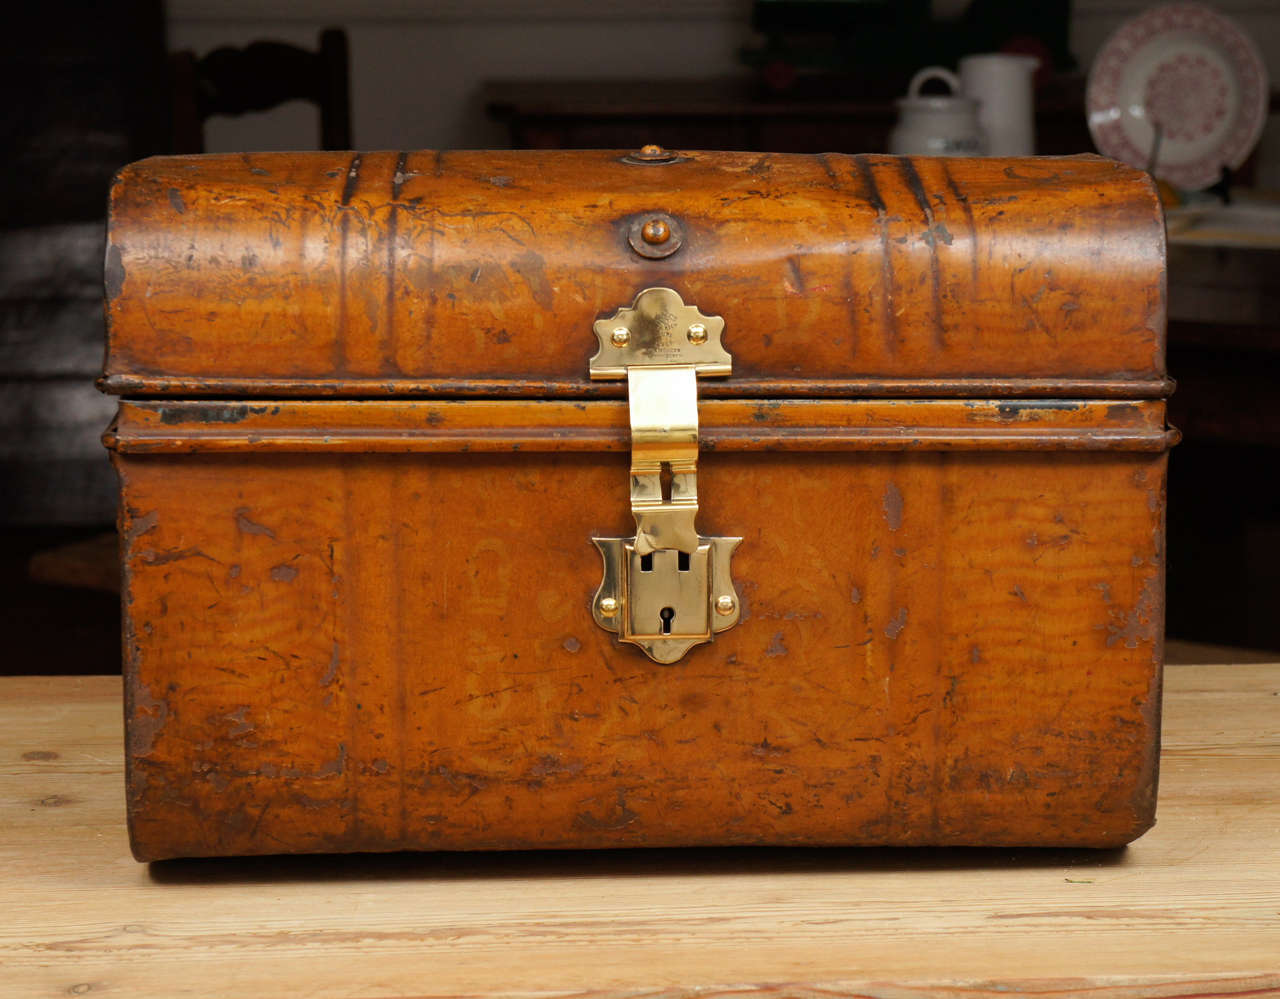 This unique English metal trunk was typical of what luggage looked like in the 19th century. Everything about this piece is original. the ware is superb and even the inside has its original blue paint.Think of the items you can collect and store in